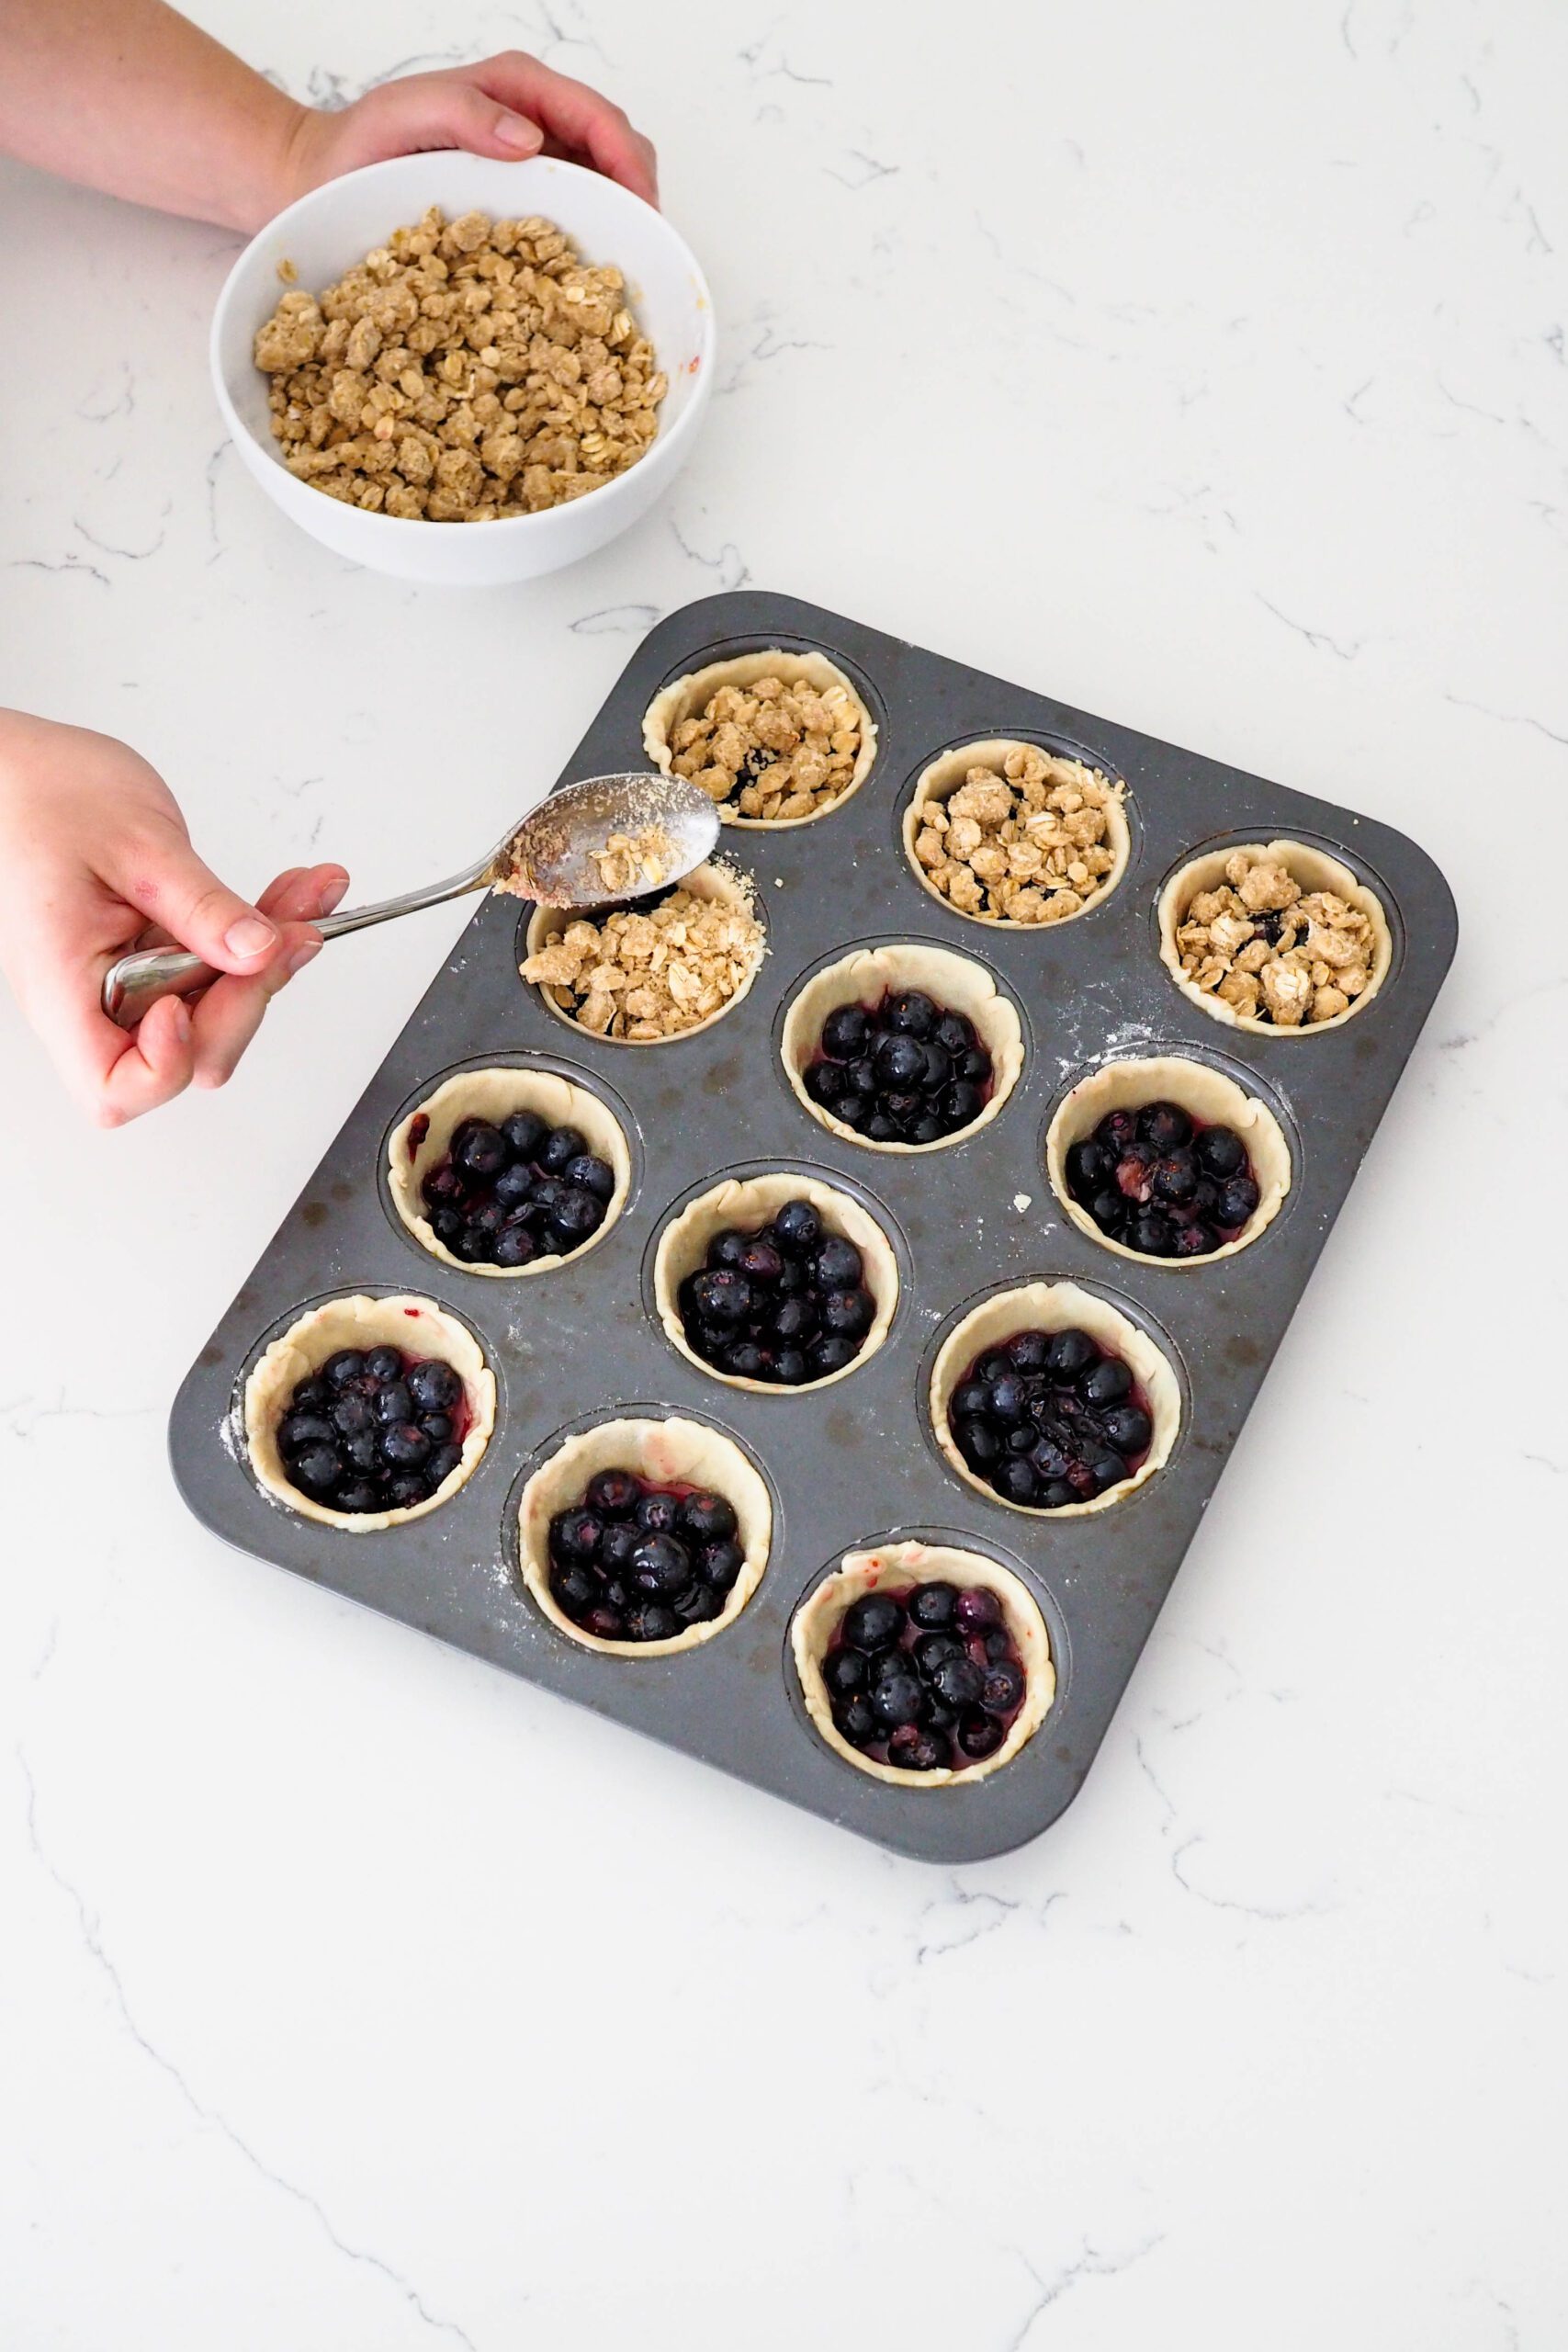 A hand spoons crumble onto mini blueberry pie shells.